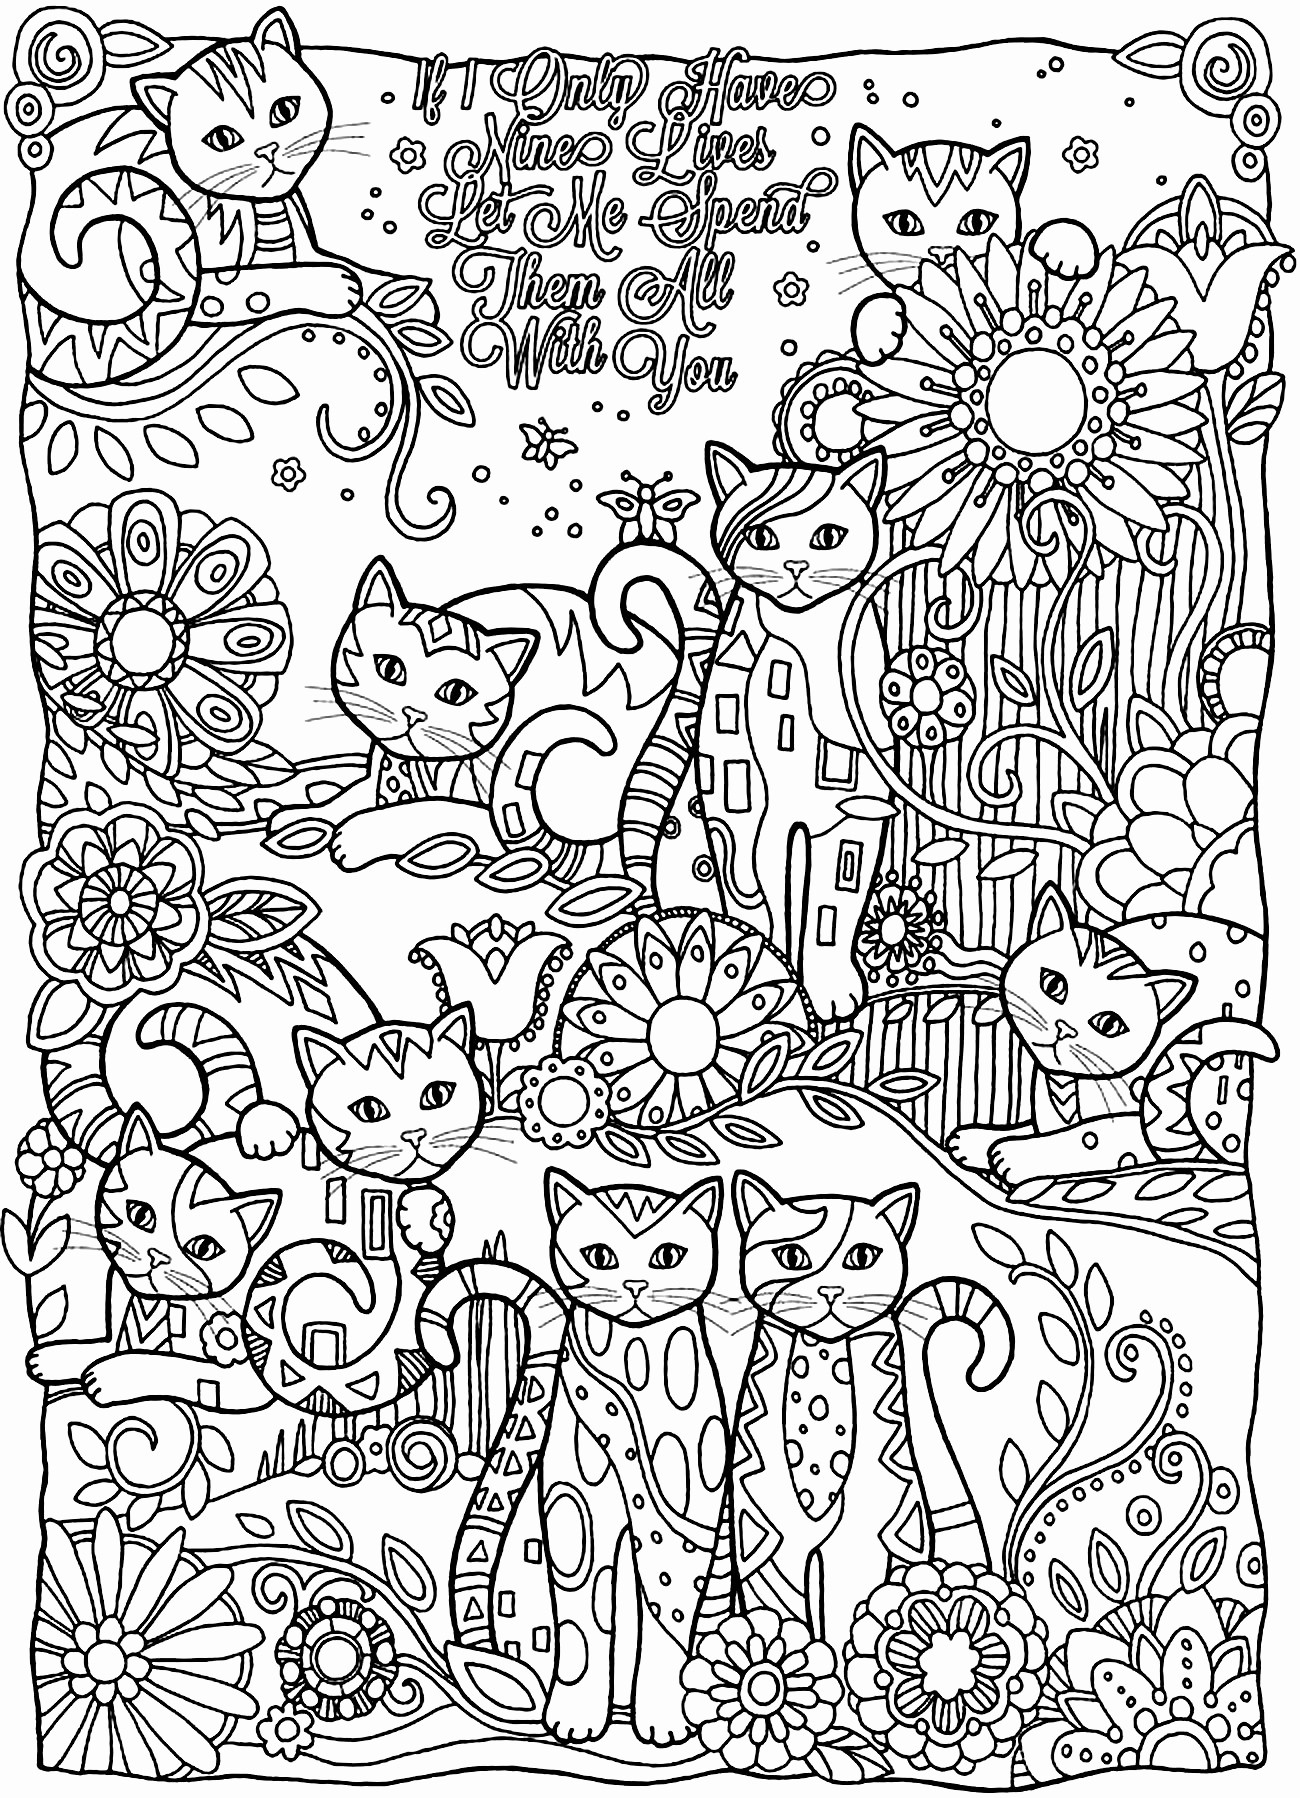 27 Stylish Fish In Flower Vase 2024 free download fish in flower vase of fish printable coloring pages new best vases flower vase coloring with fish printable coloring pages new fish coloring pages for adults beautiful cute printable colori